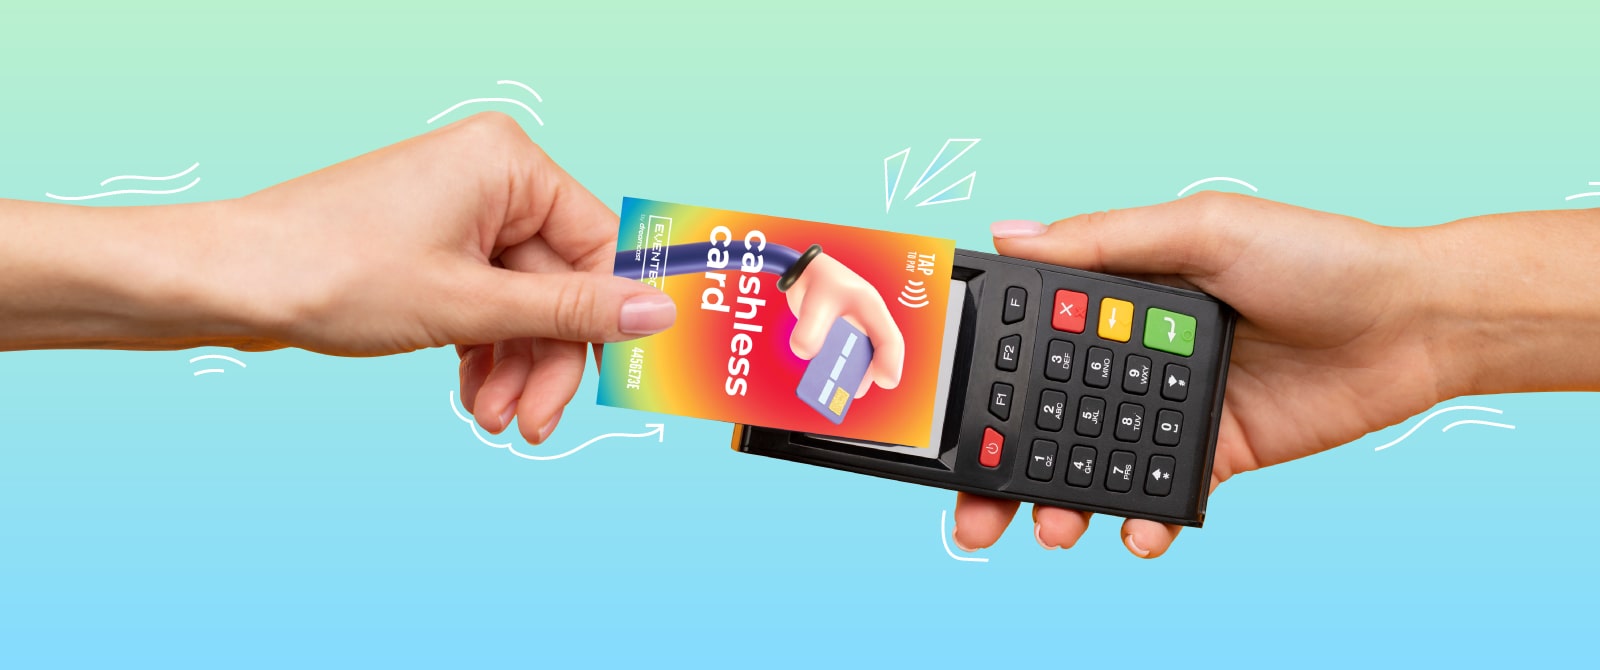 Why Tap-to-Pay Is Safer Than a Credit Card Swipe